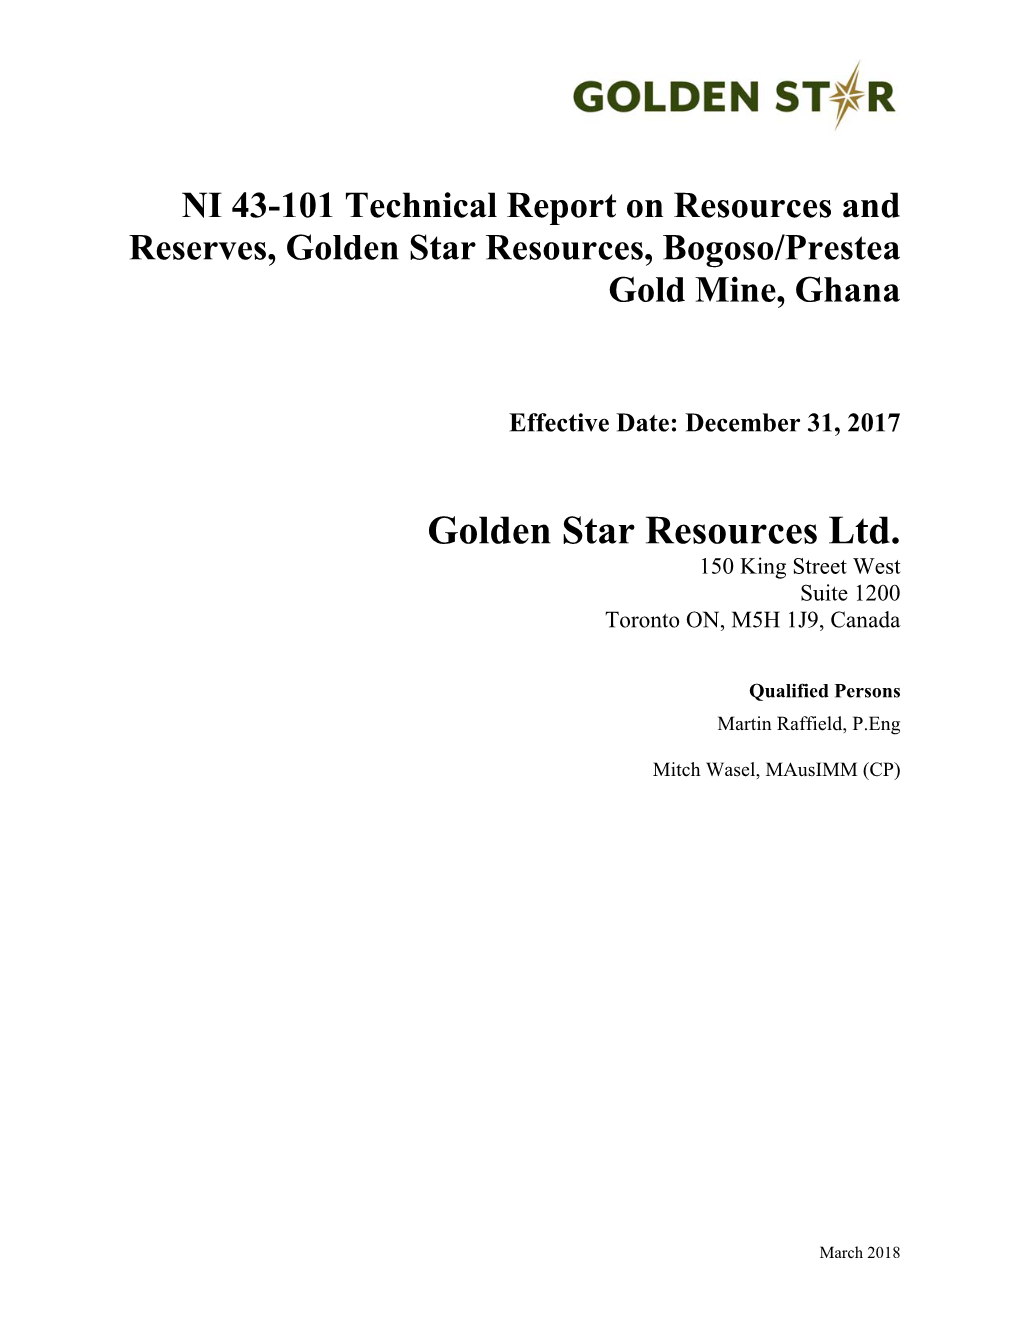 Technical Report on Resources and Reserves, Golden Star Resources, Bogoso/Prestea Gold Mine, Ghana